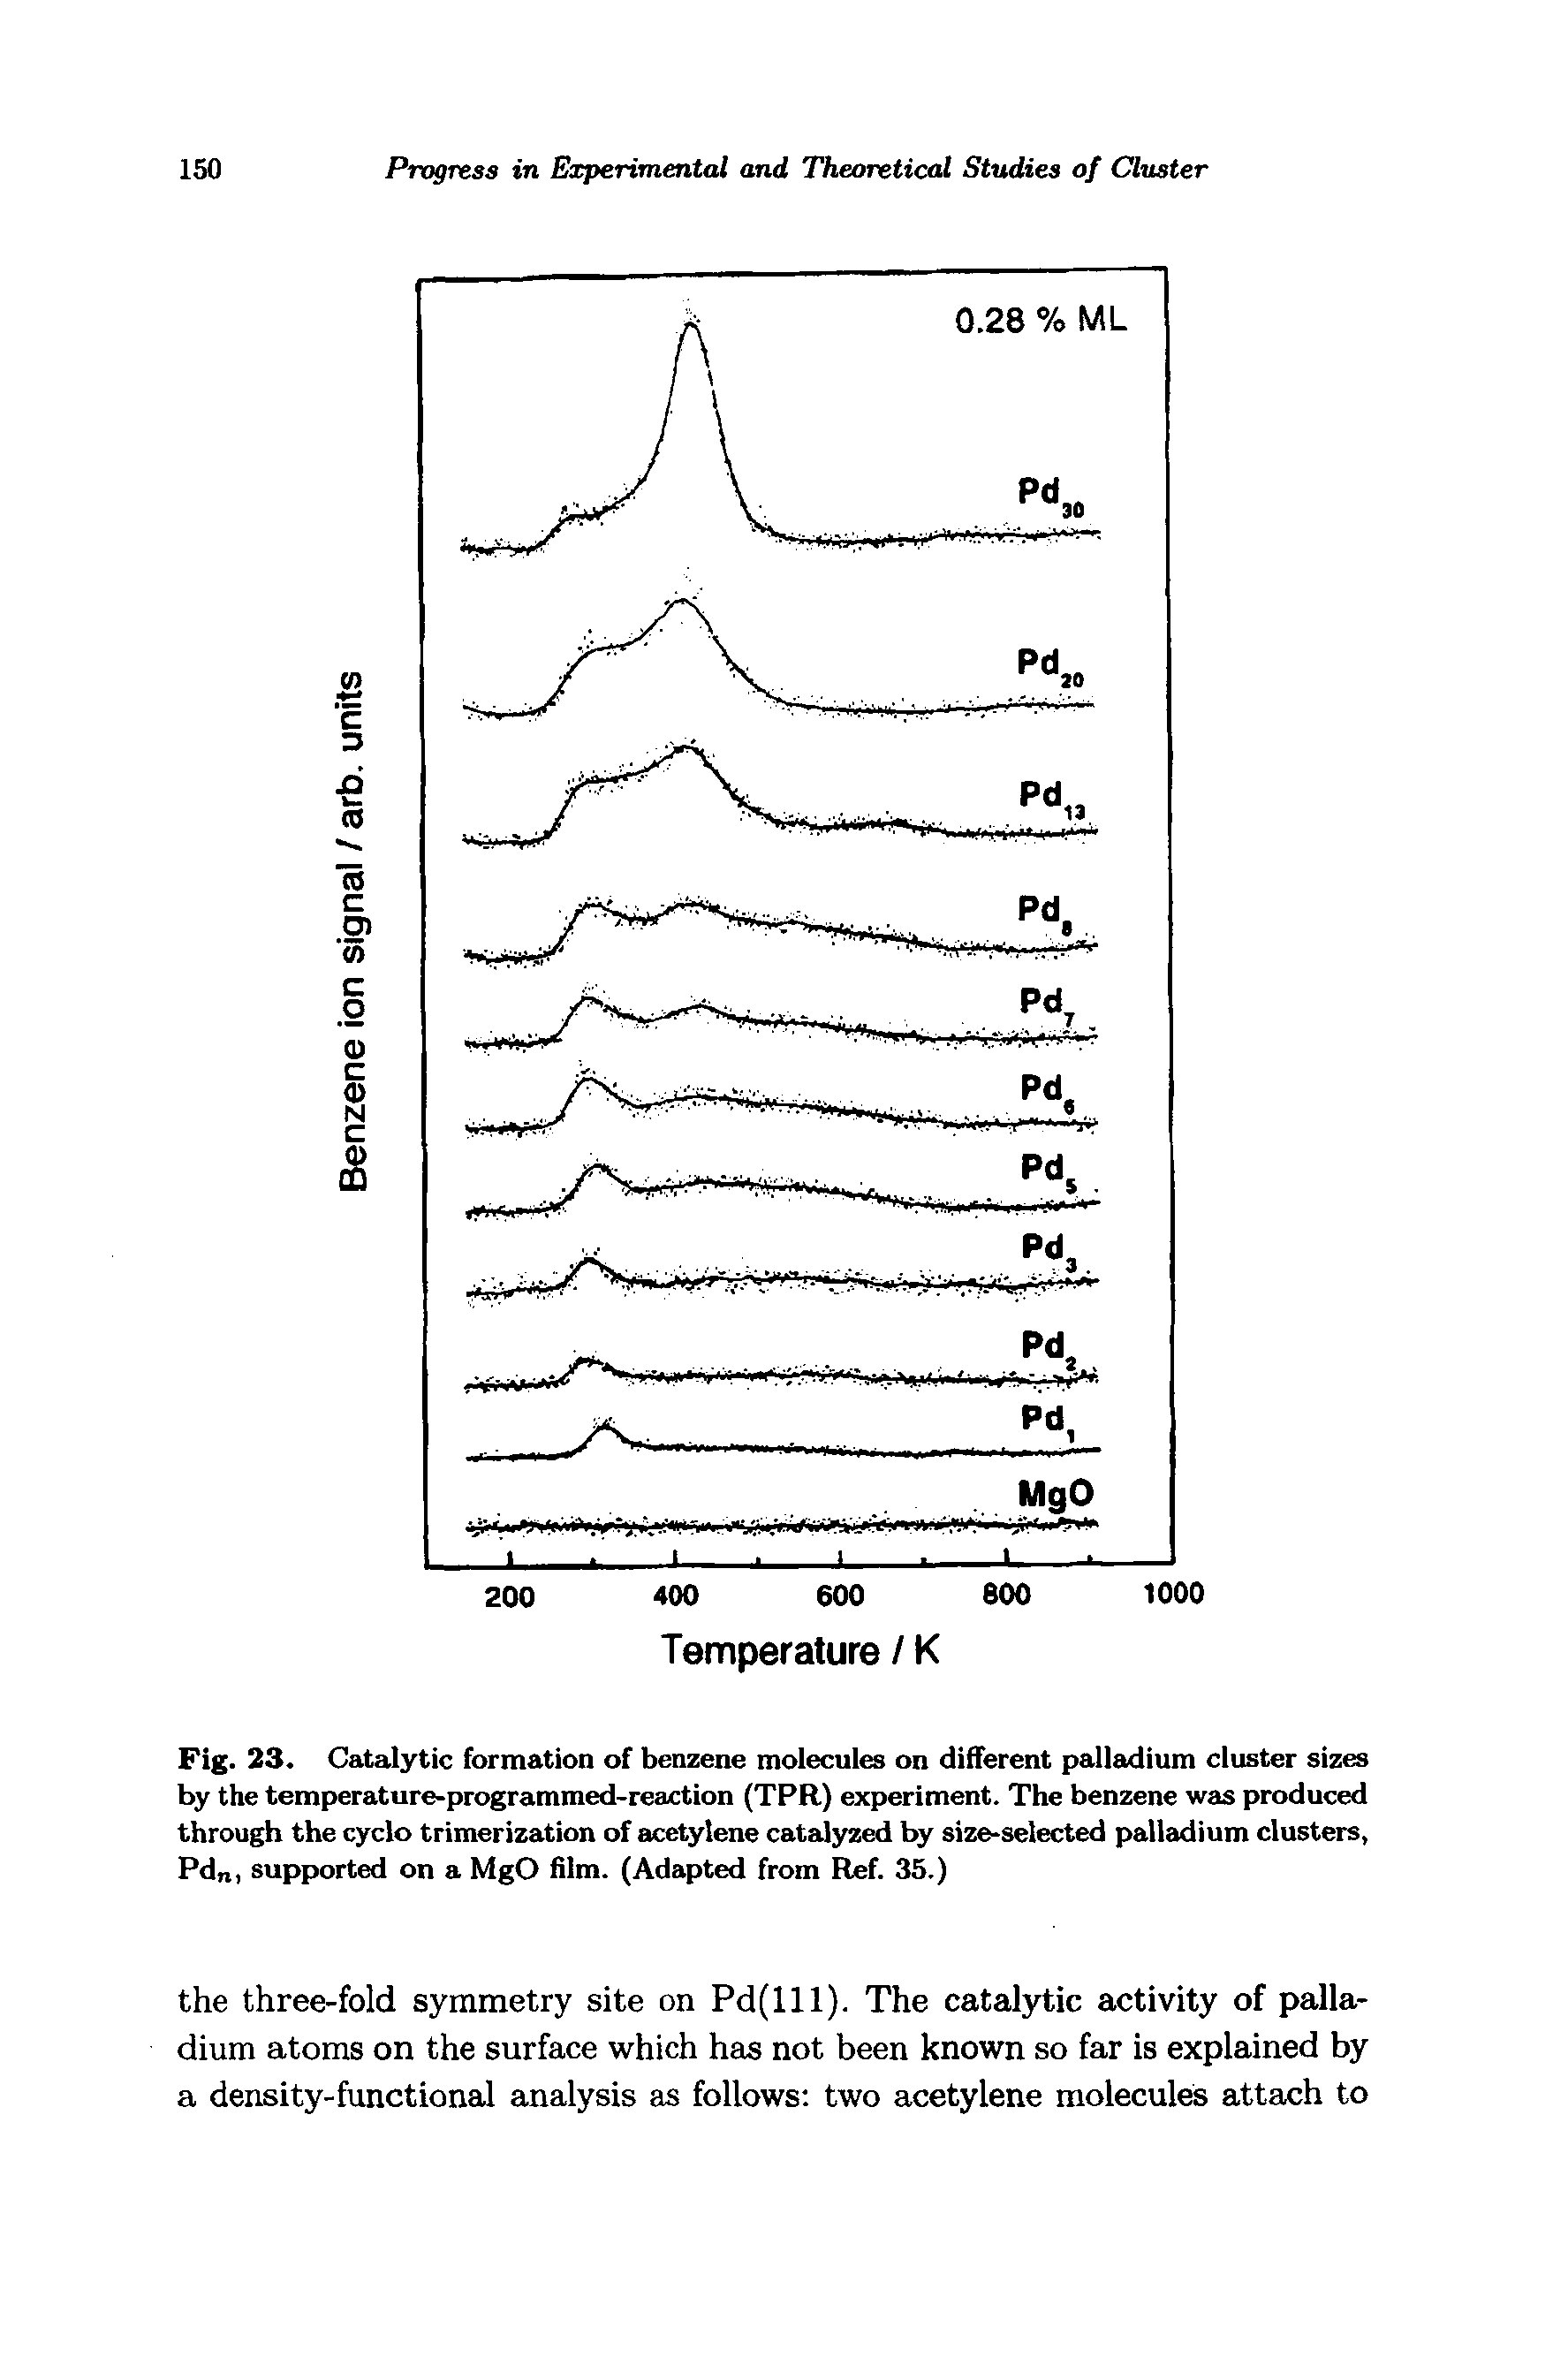 Fig. 23. Catalytic formation of benzene molecules on different palladiiun cluster sizes by the temperature-programmed-reaction (TPR) experiment. The benzene was produced through the cyclo trimerization of acetylene catalyzed by size-selected palladium clusters, Pdni supported on a MgO film. (Adapted from Ref. 35.)...